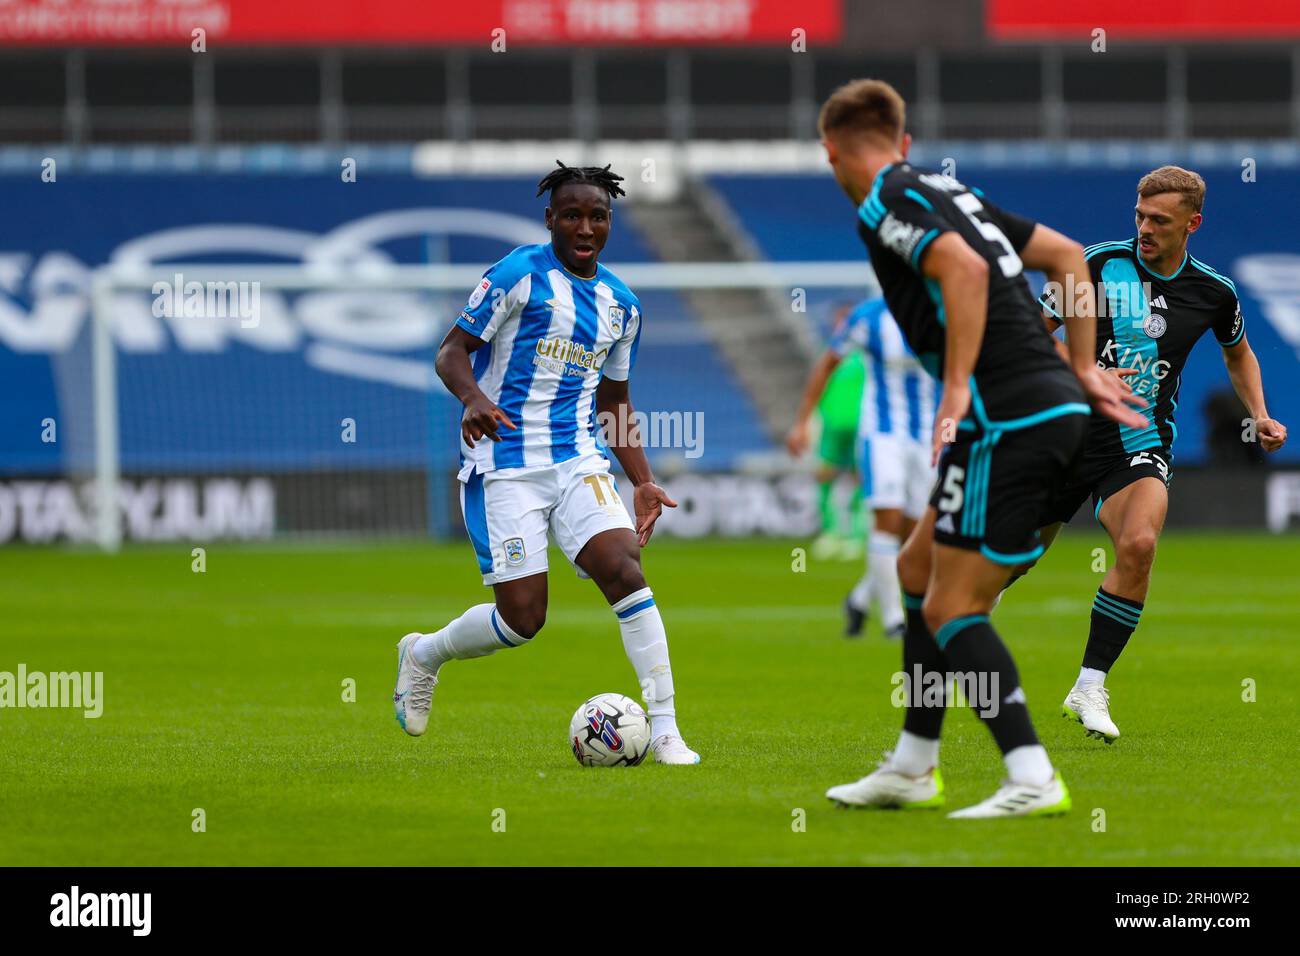 John Smith's Stadium, Huddersfield, England - 12th August 2023 Brahima Diarra (11) of Huddersfield Town looks to take on the Leicester City defence - during the game Huddersfield Town v Leicester City, Sky Bet Championship,  2023/24, John Smith's Stadium, Huddersfield, England - 12th August 2023 Credit: Mathew Marsden/WhiteRosePhotos/Alamy Live News Stock Photo